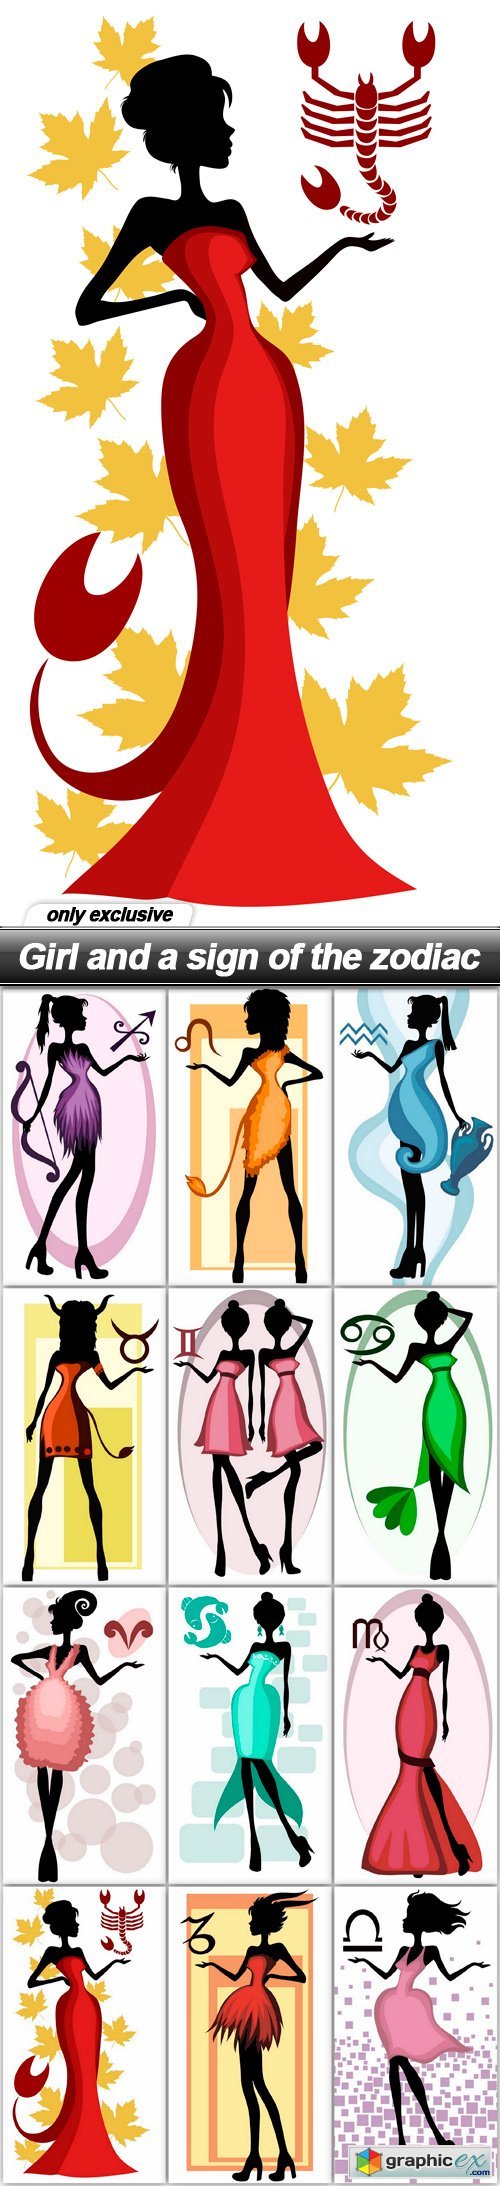 Girl and a sign of the zodiac - 12 UHQ JPEG